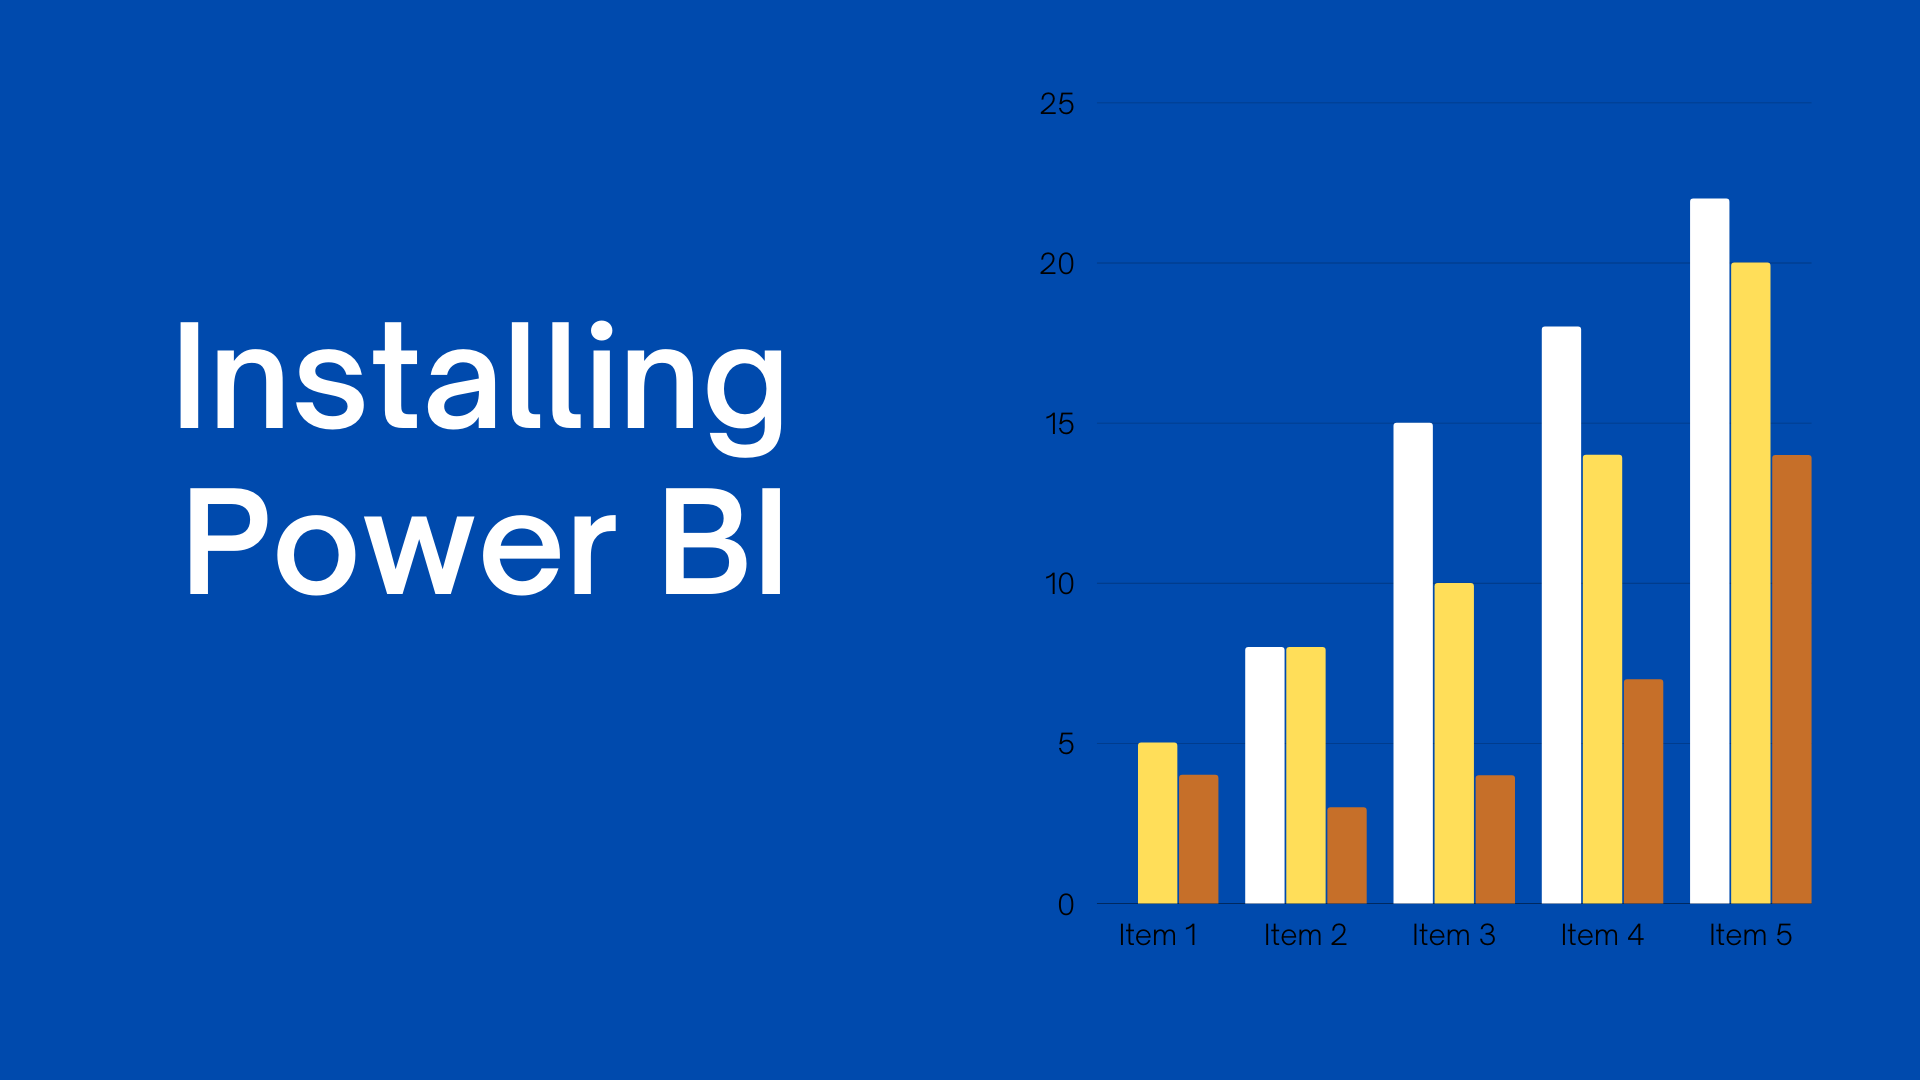 What Do I Need To Install In Order To Use Power BI?